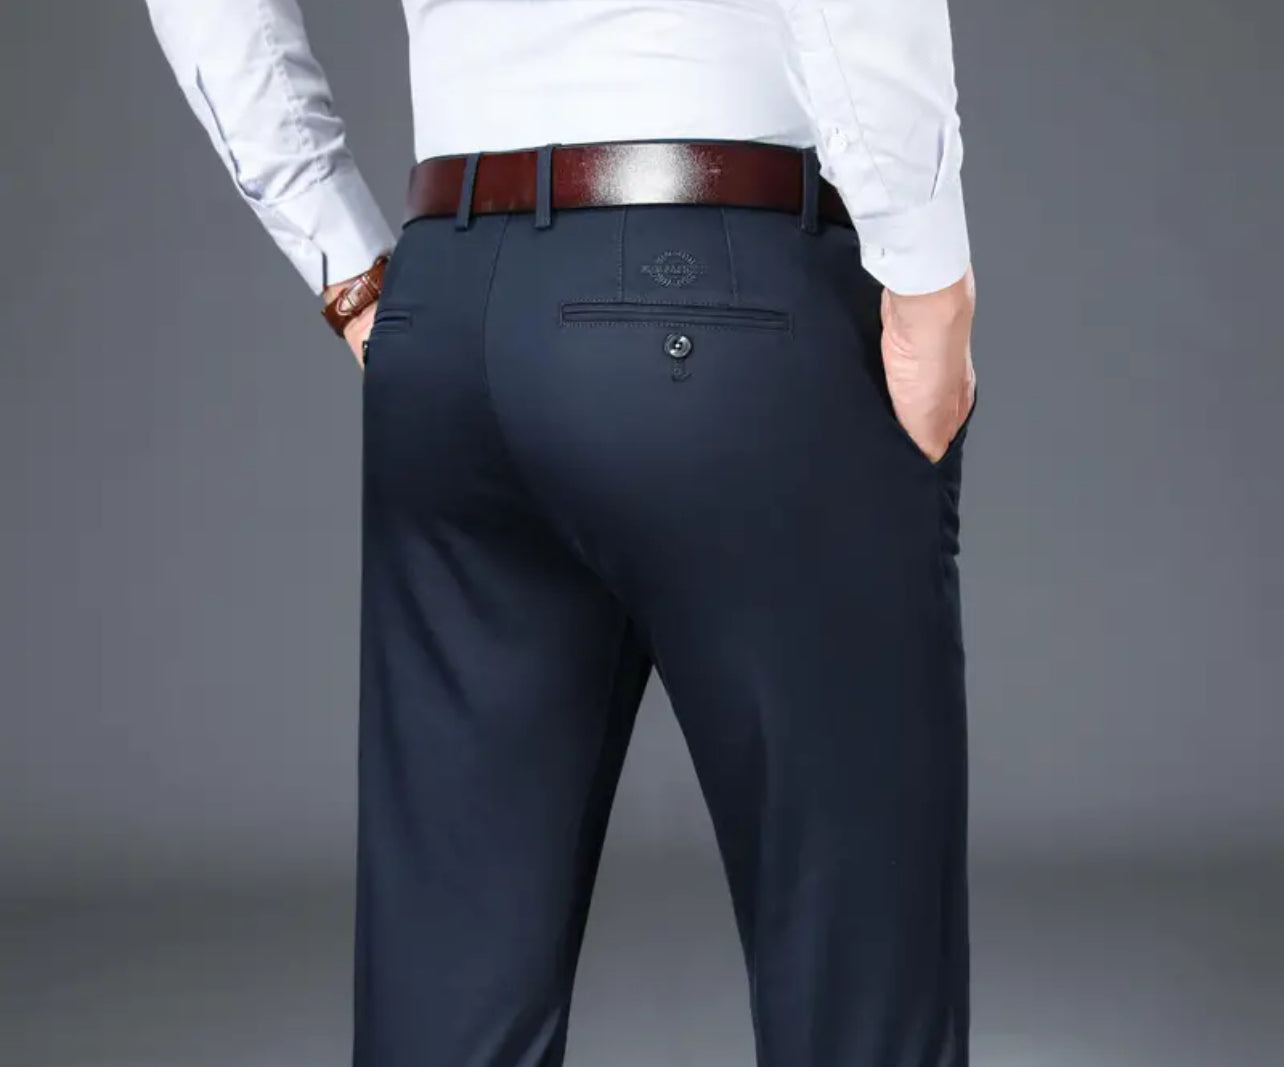 Classic Design, Semi-formal Stretchy, Dress Pants, Sugar Daddy 🎩 Collection